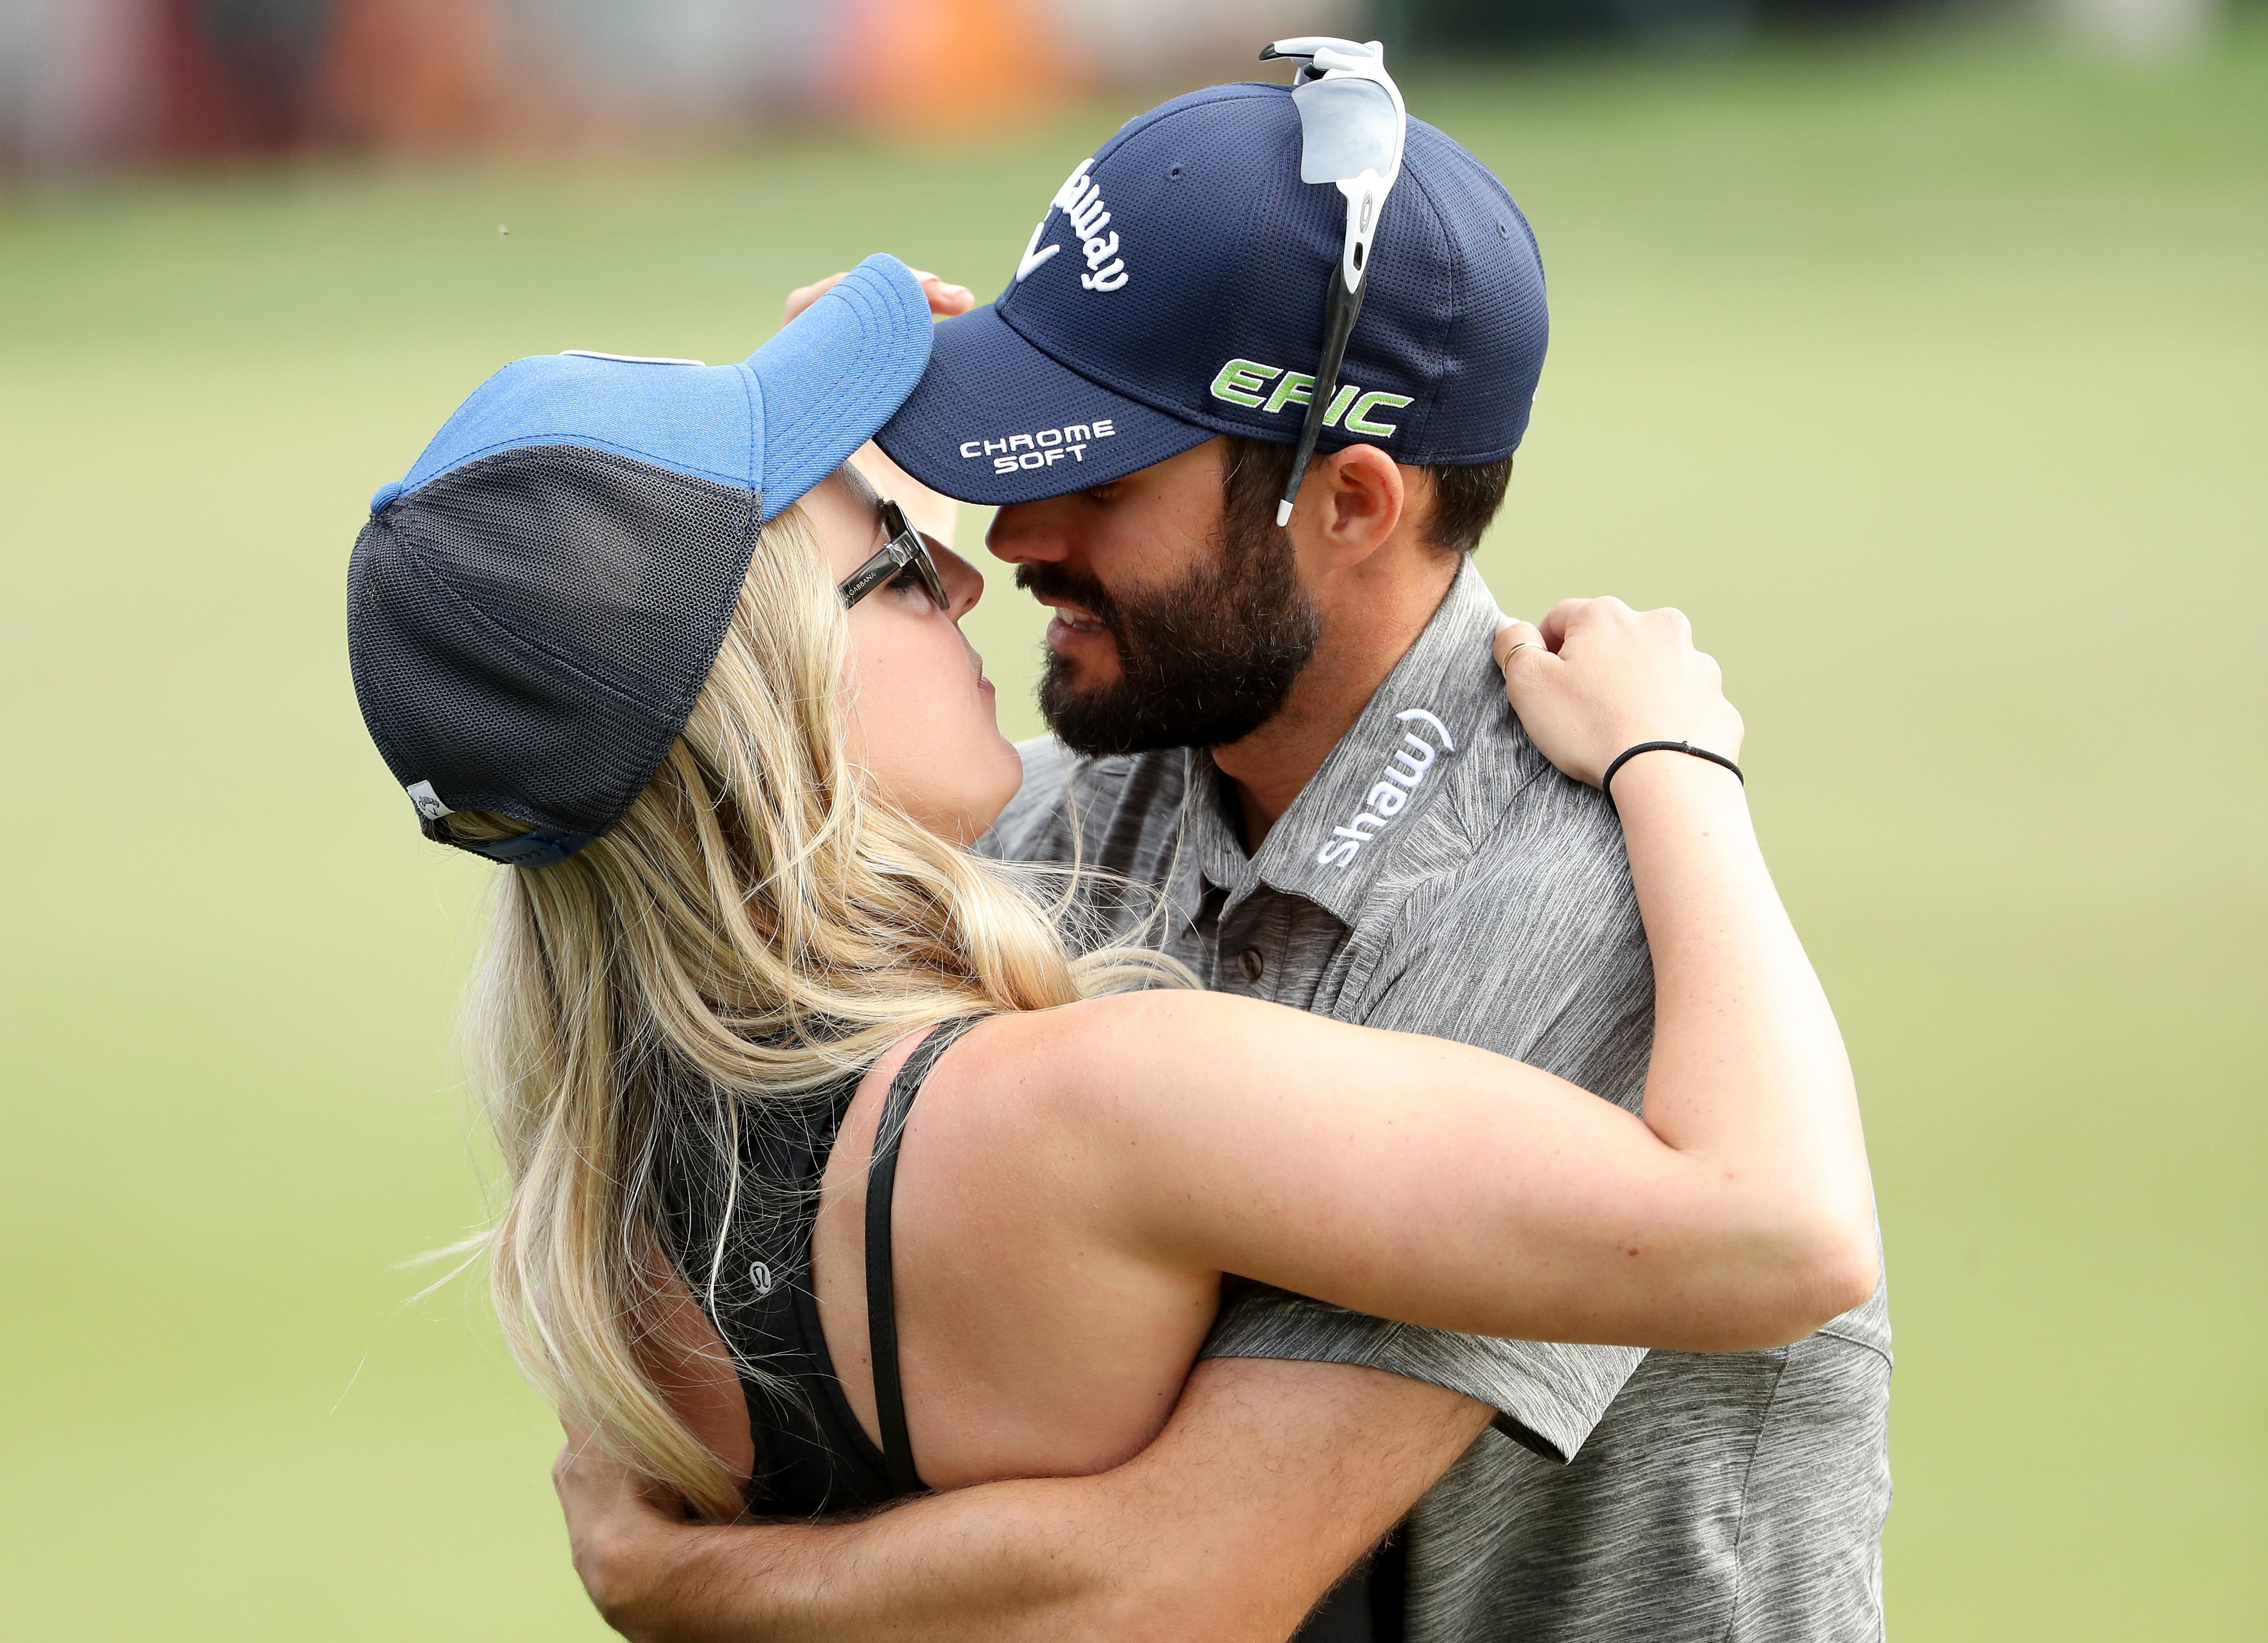 Another PGA Tour pro is deep in the doghouse after commenting on his wifes outfit This is the Loop GolfDigest